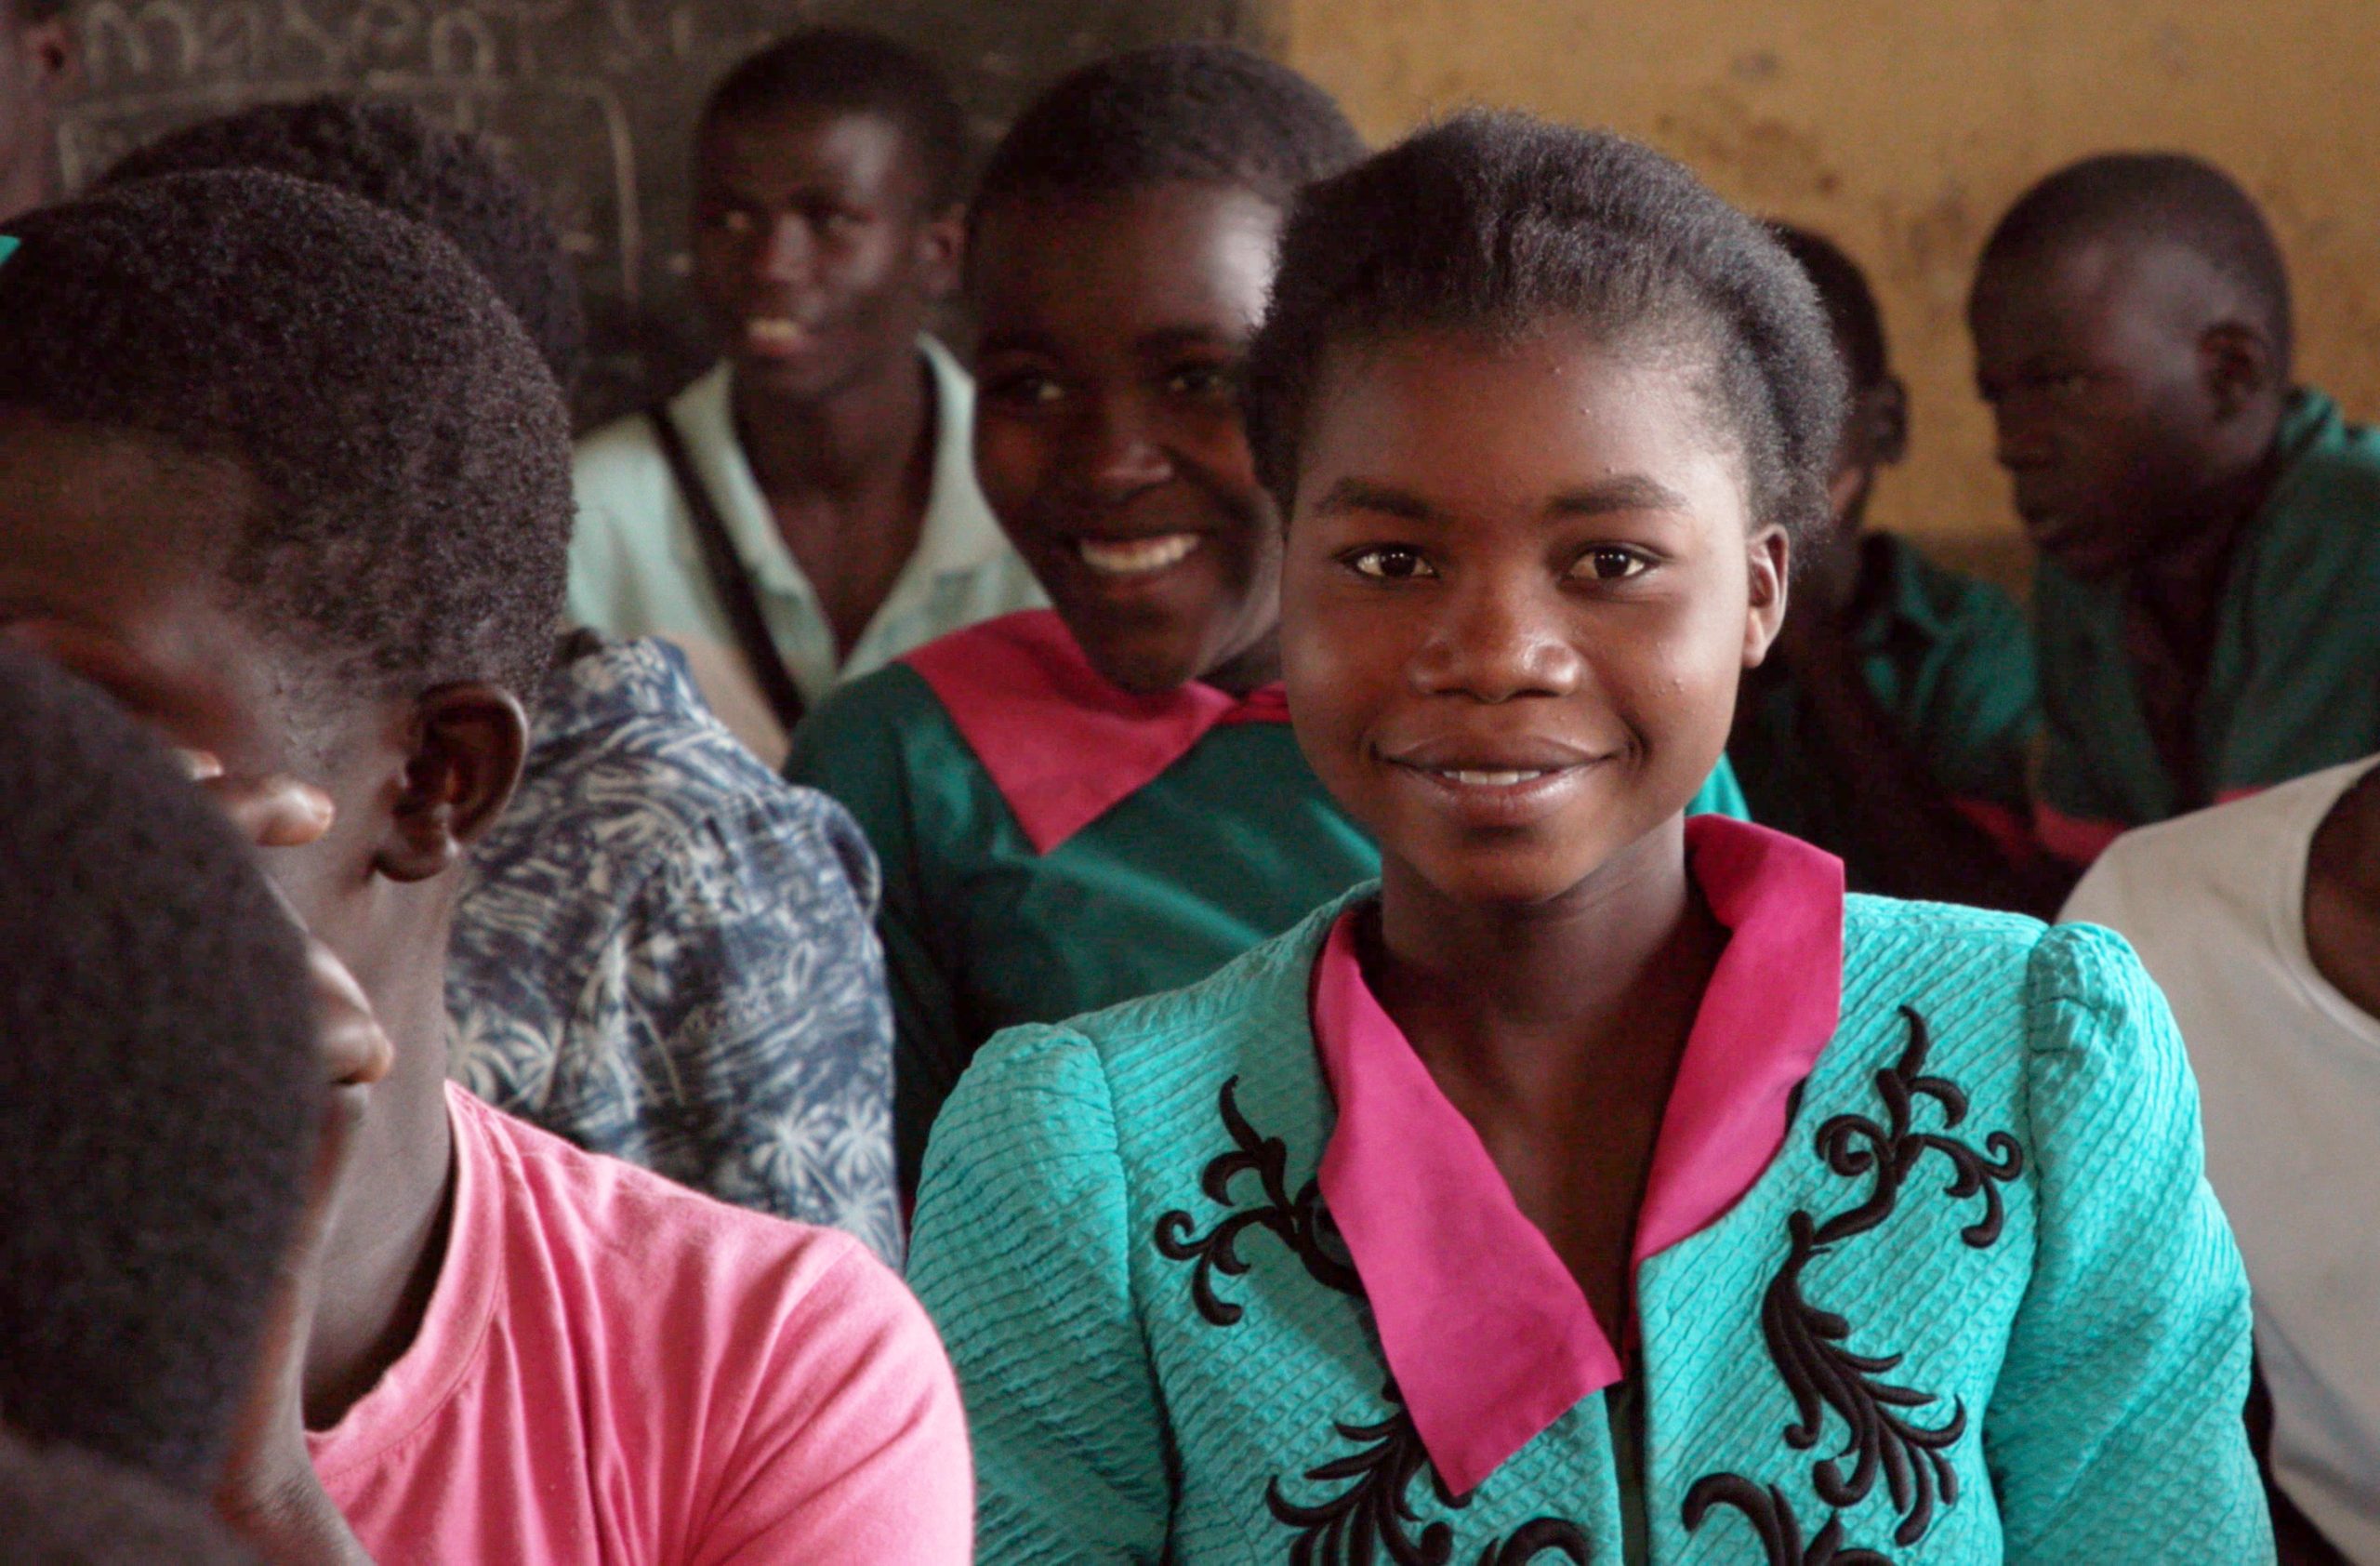 Educate A Child launch: Tackling school exclusion and drop-out in Malawi